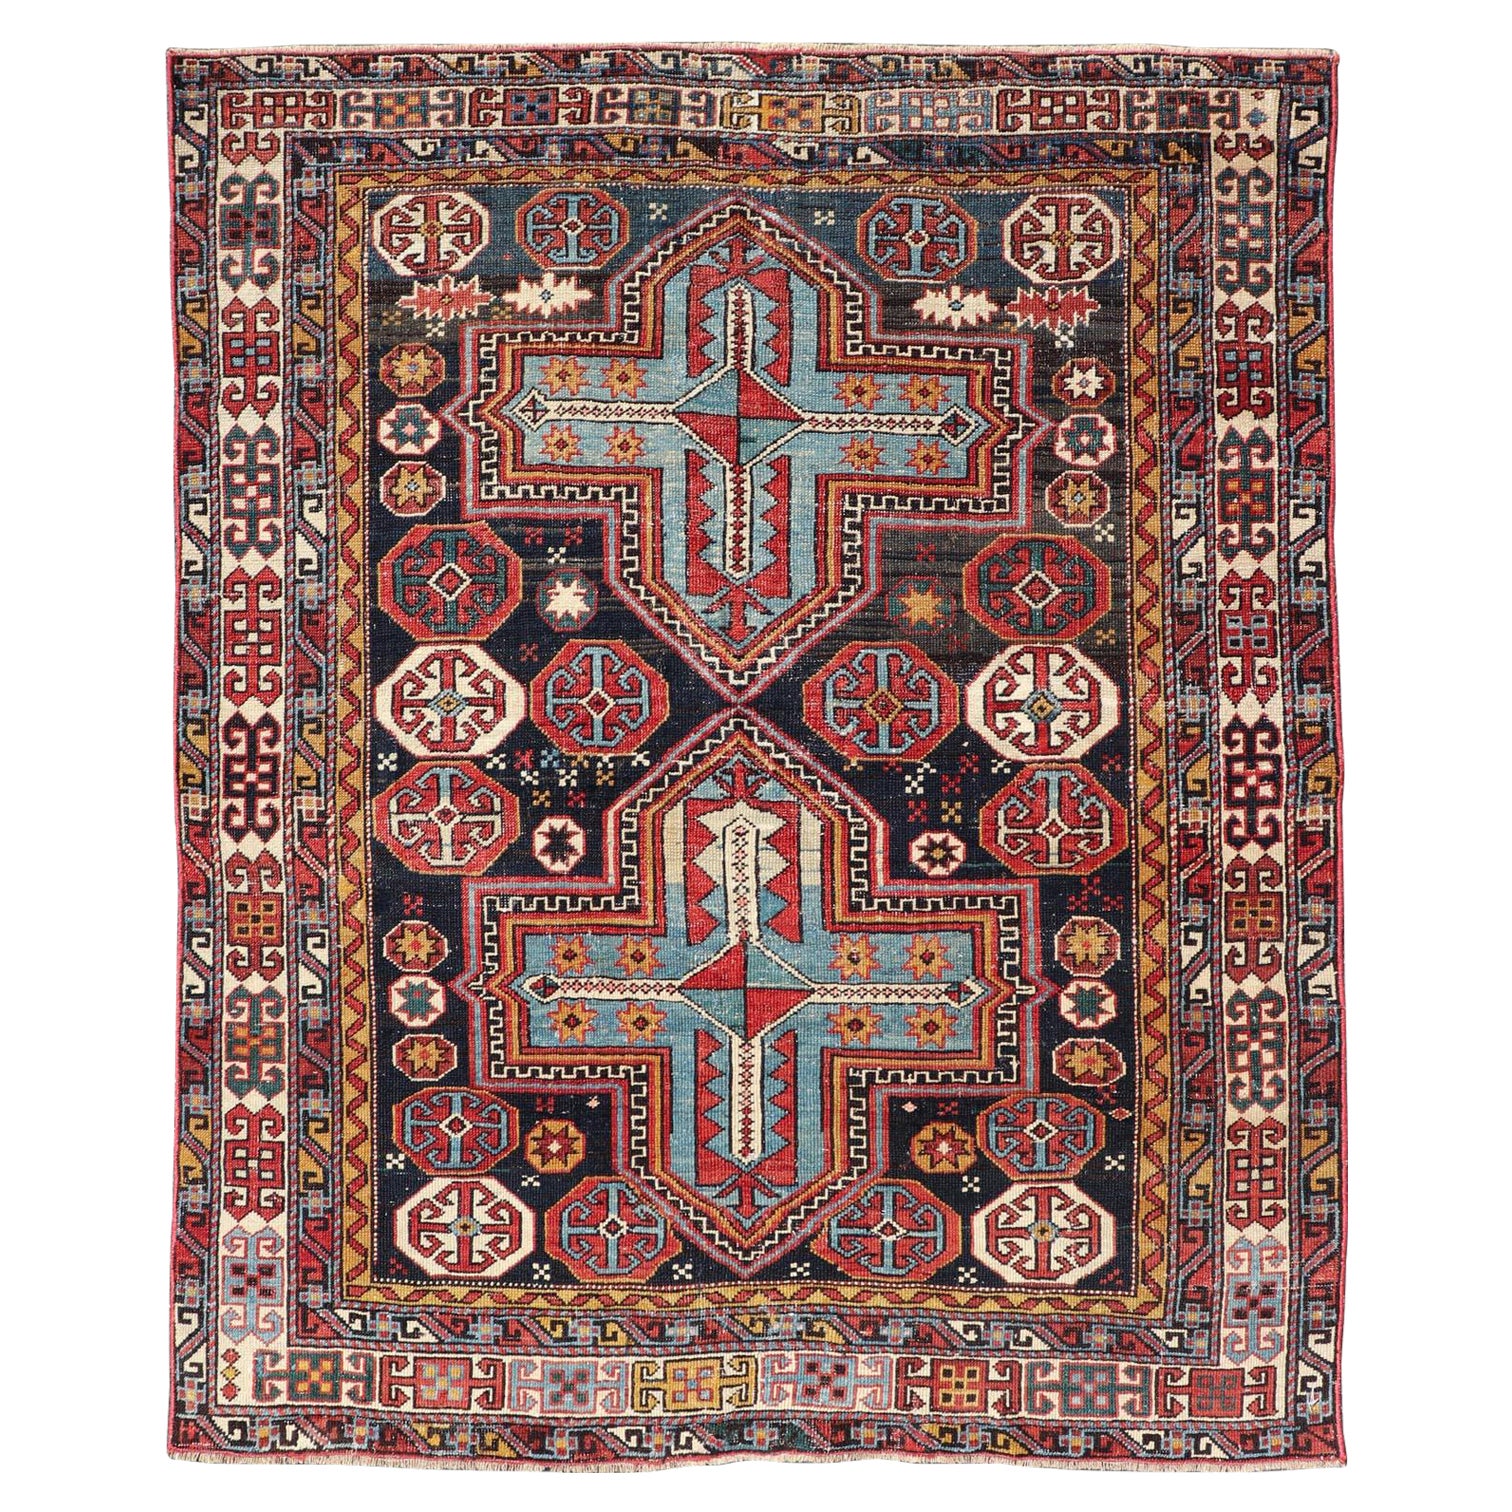 Sqaure Antique Colorful Kuba Caucasian Rug with Cross Medallions For Sale